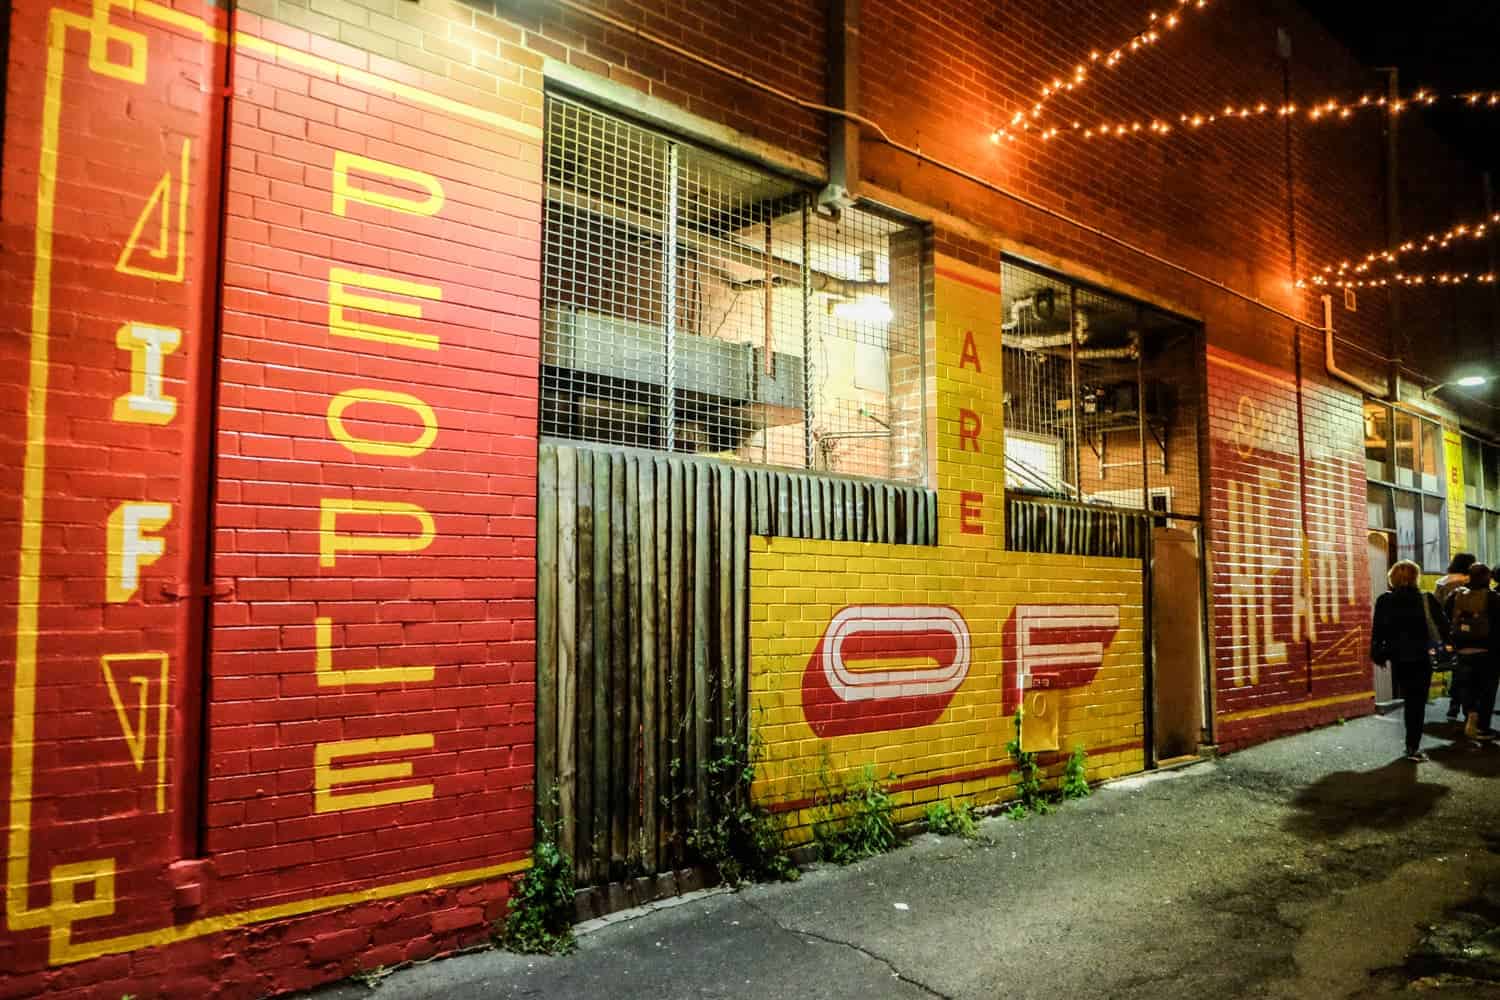 Red and yellow street art saying 'if people are of heart' in Chinatown in Perth, Australia